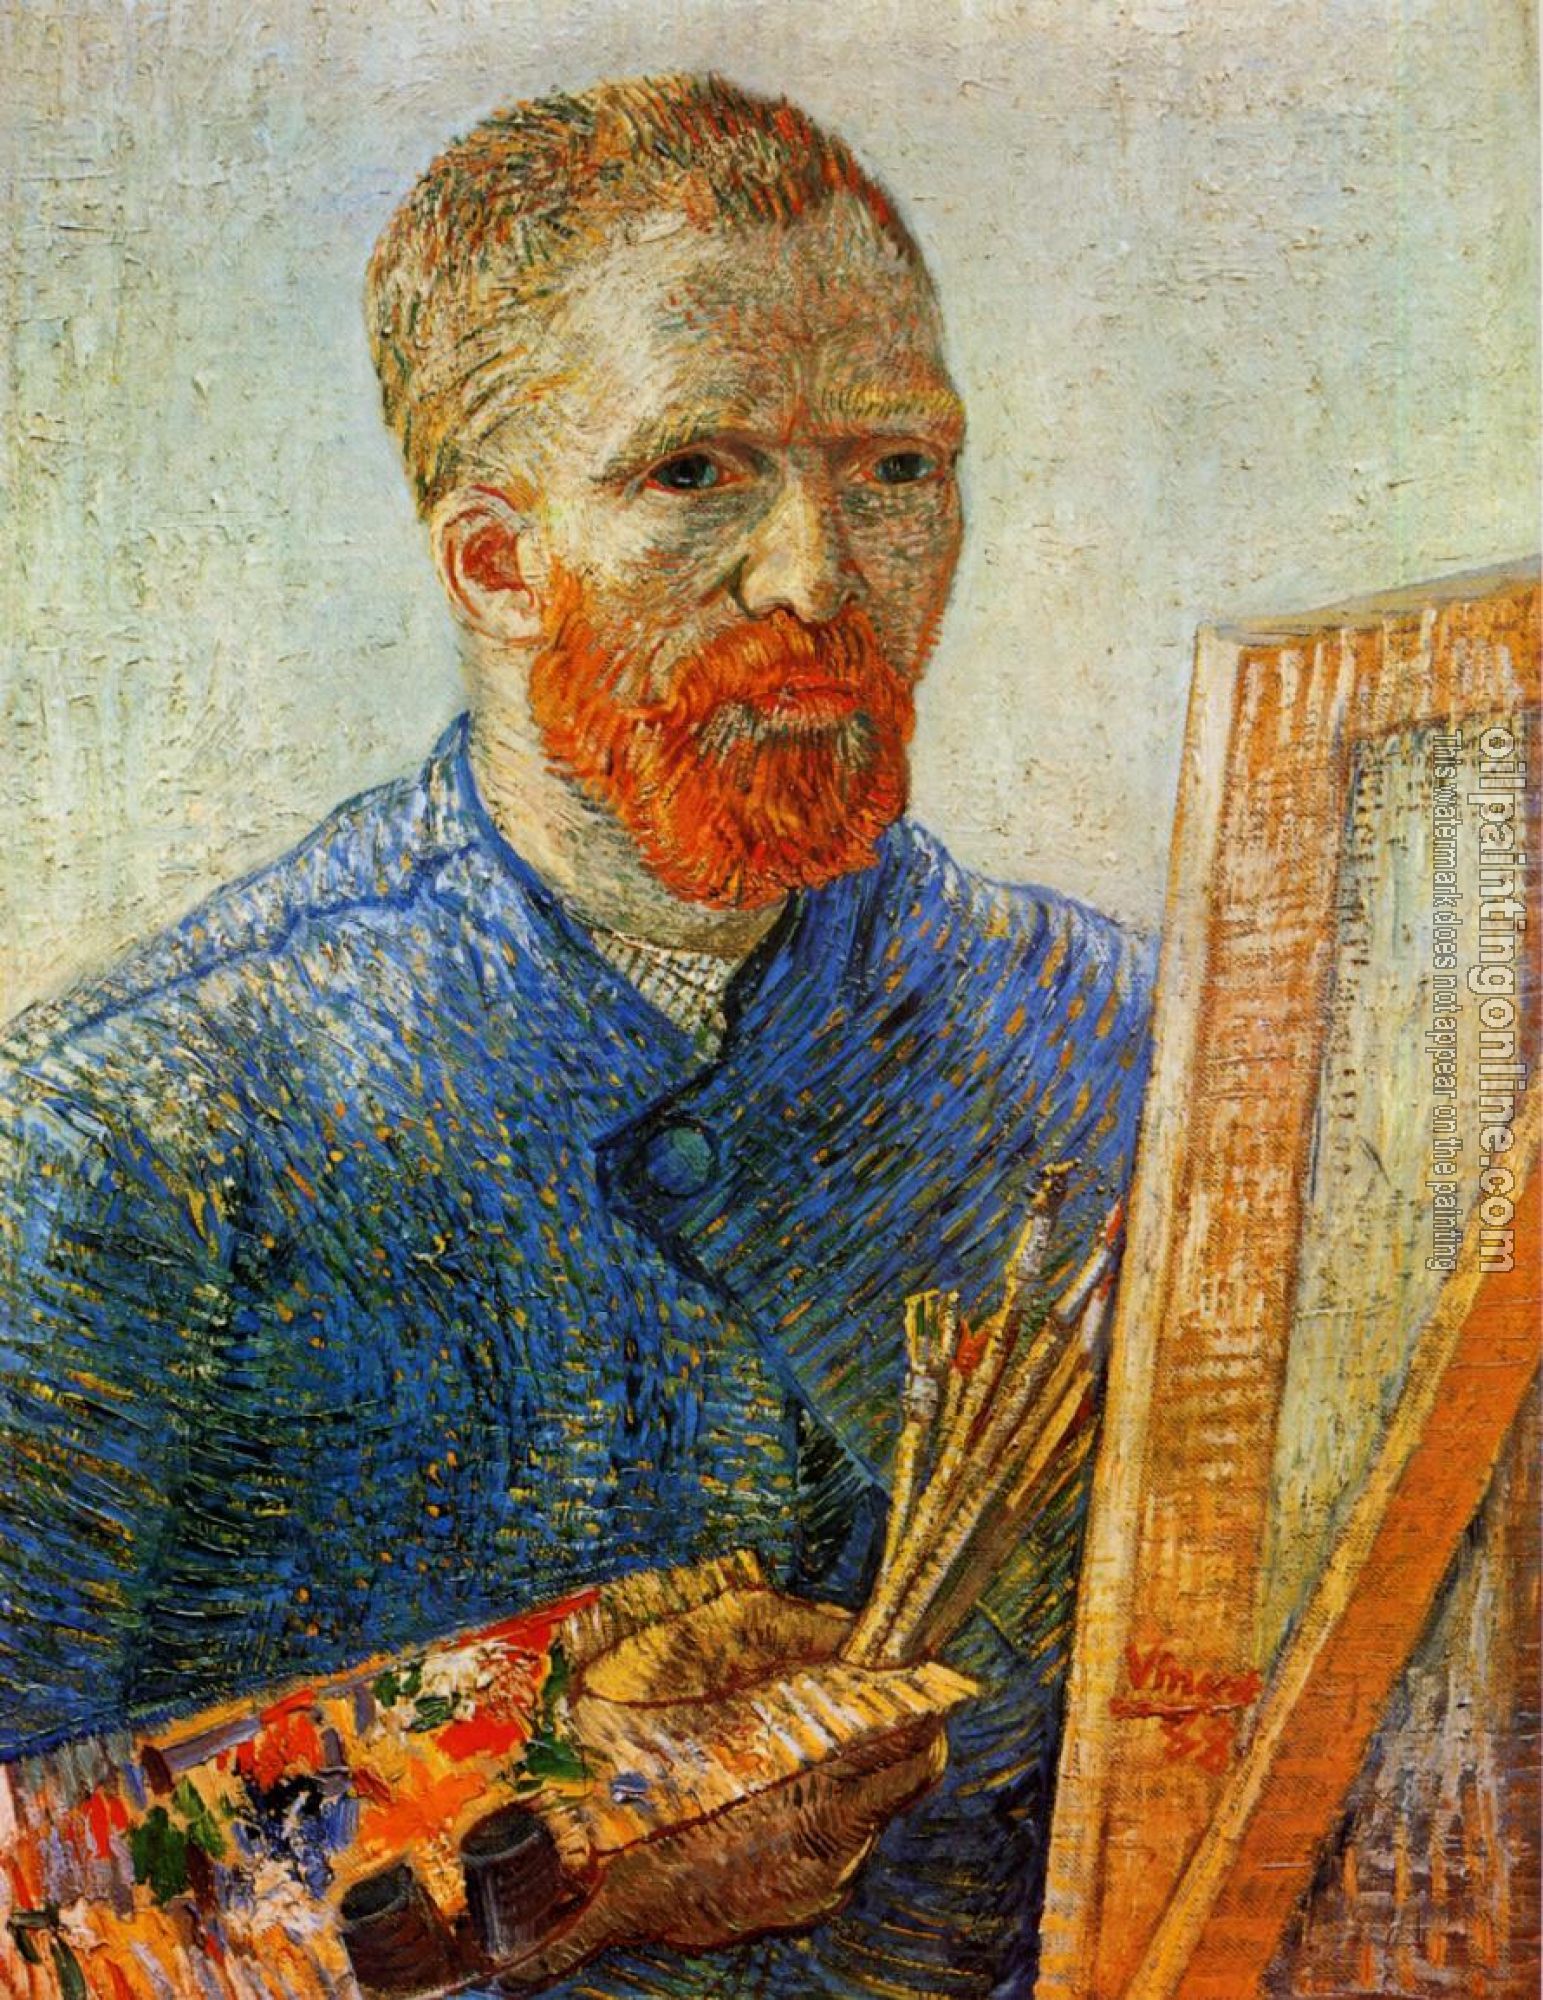 Gogh, Vincent van - Self Portrait in Front of the Easel